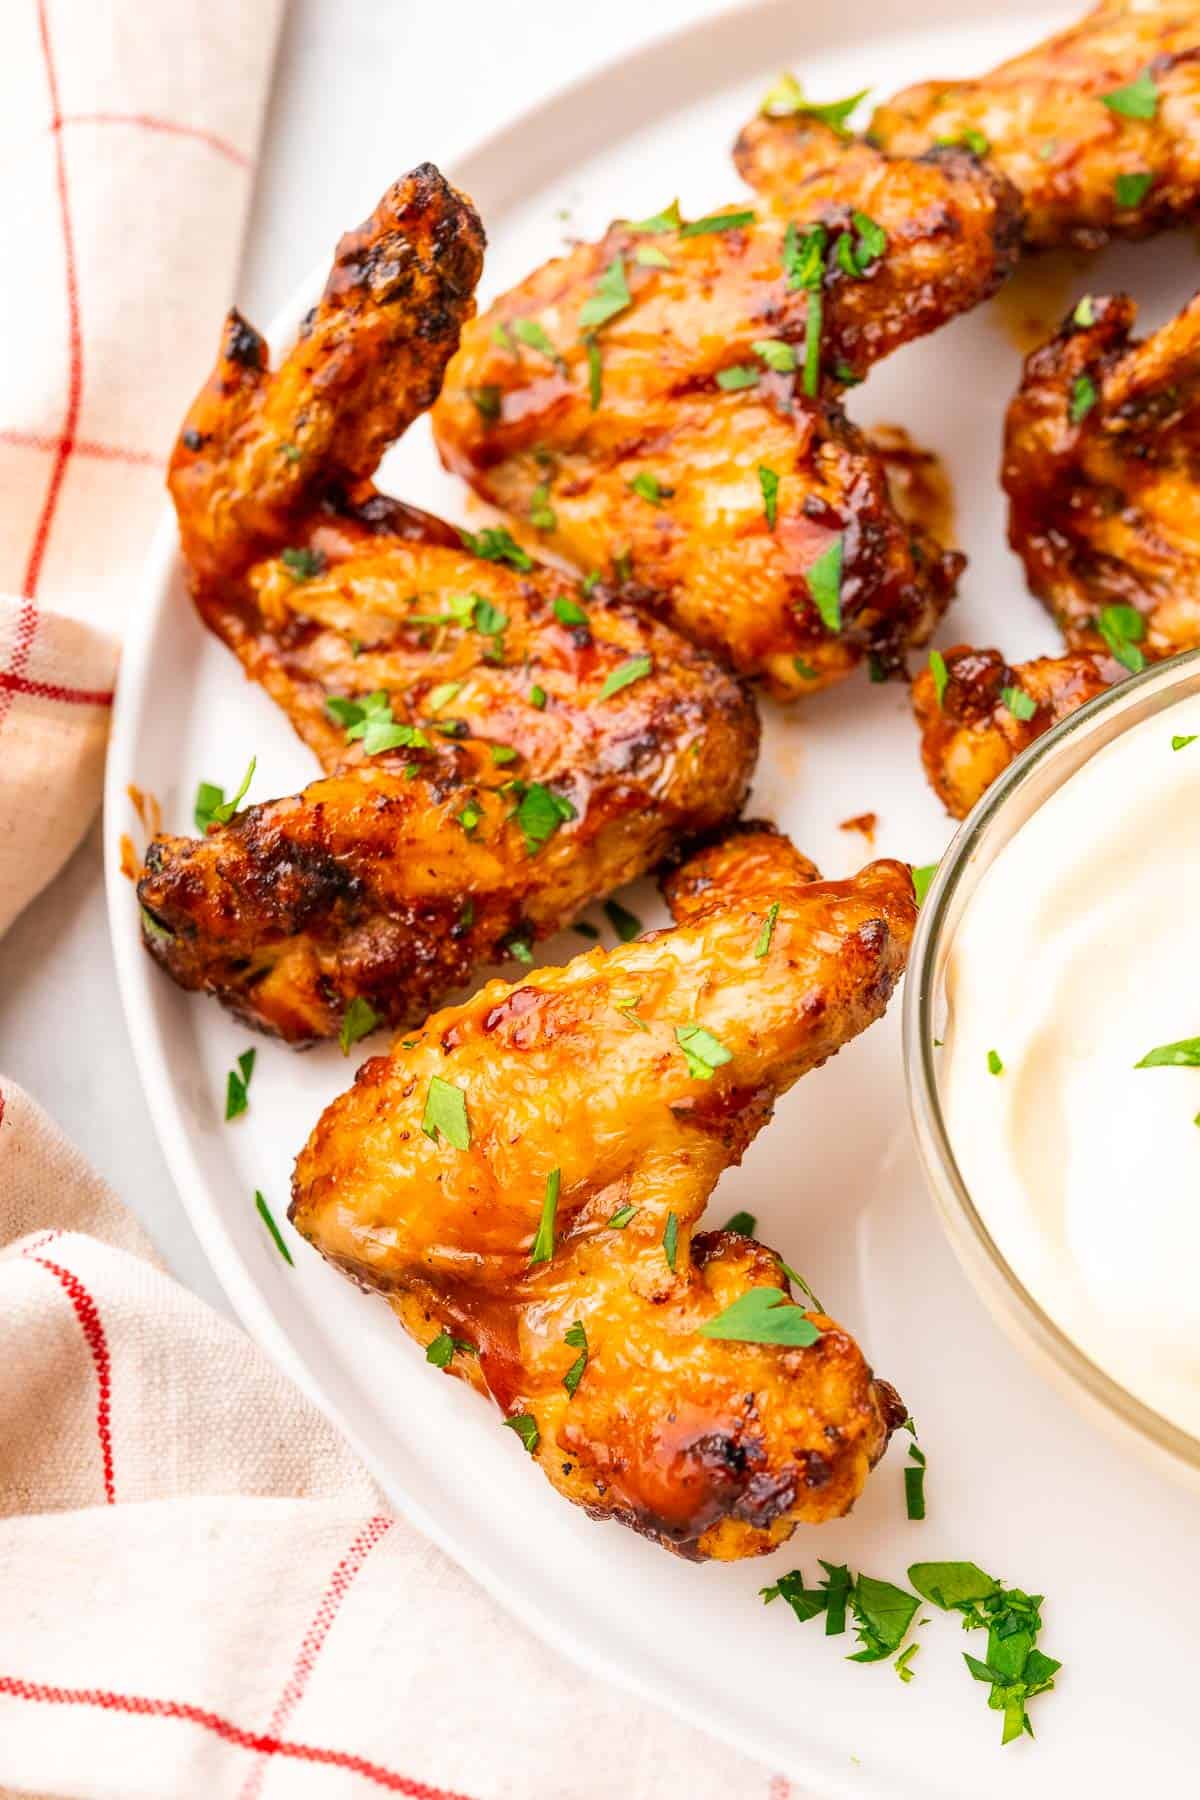 Frozen ranch chicken wings in air fryer (Tyson or other brand